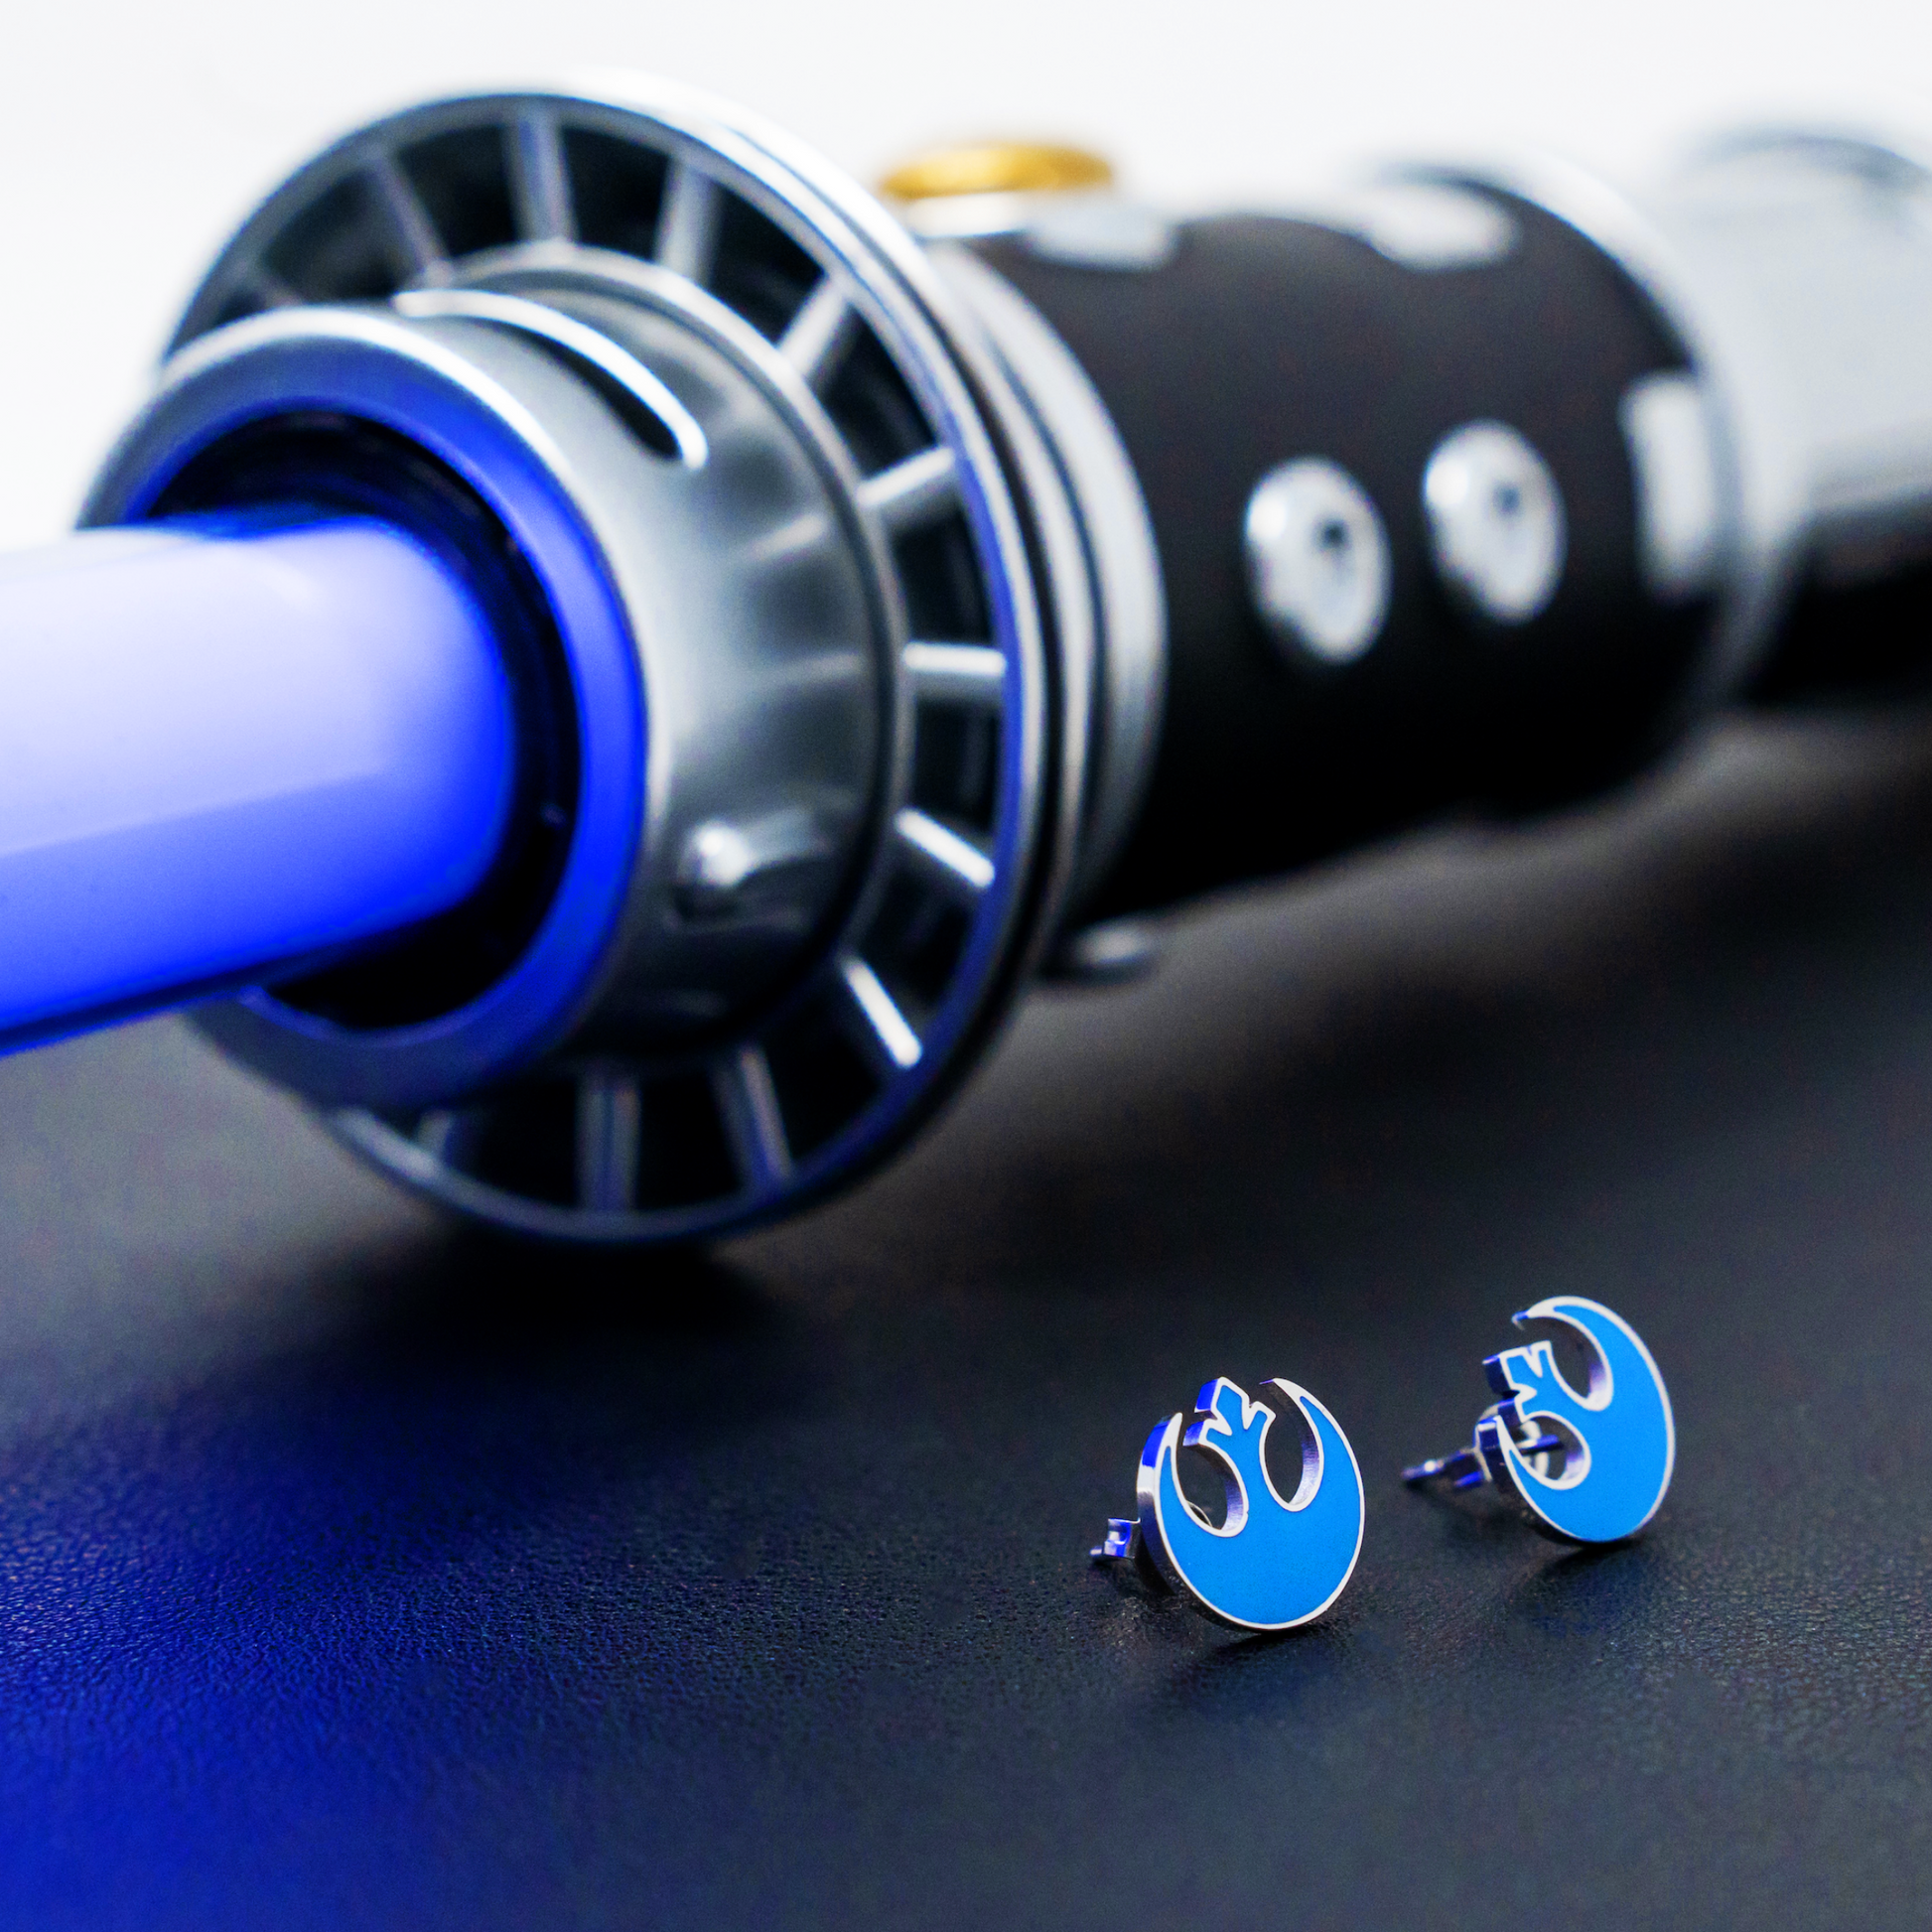 A pair of blue earrings featuring the rebel icon from Star Wars on a black backdrop with a blue lightsaber in the background